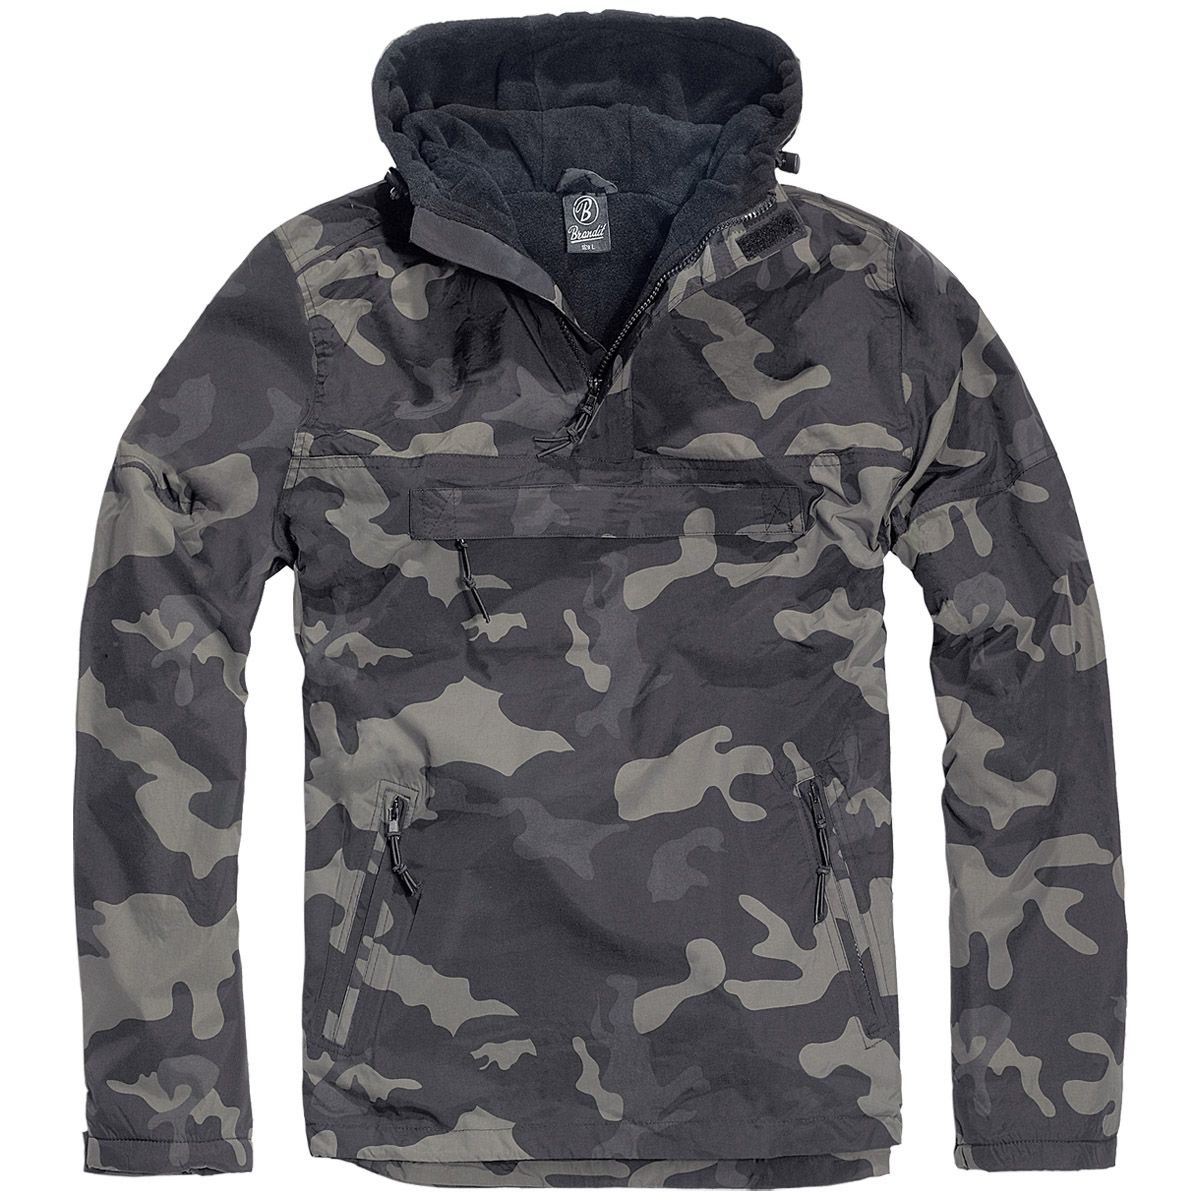 Fleeces: Hoodies, Tops, Jackets & Fleece Gilets – The Back Alley Army Store